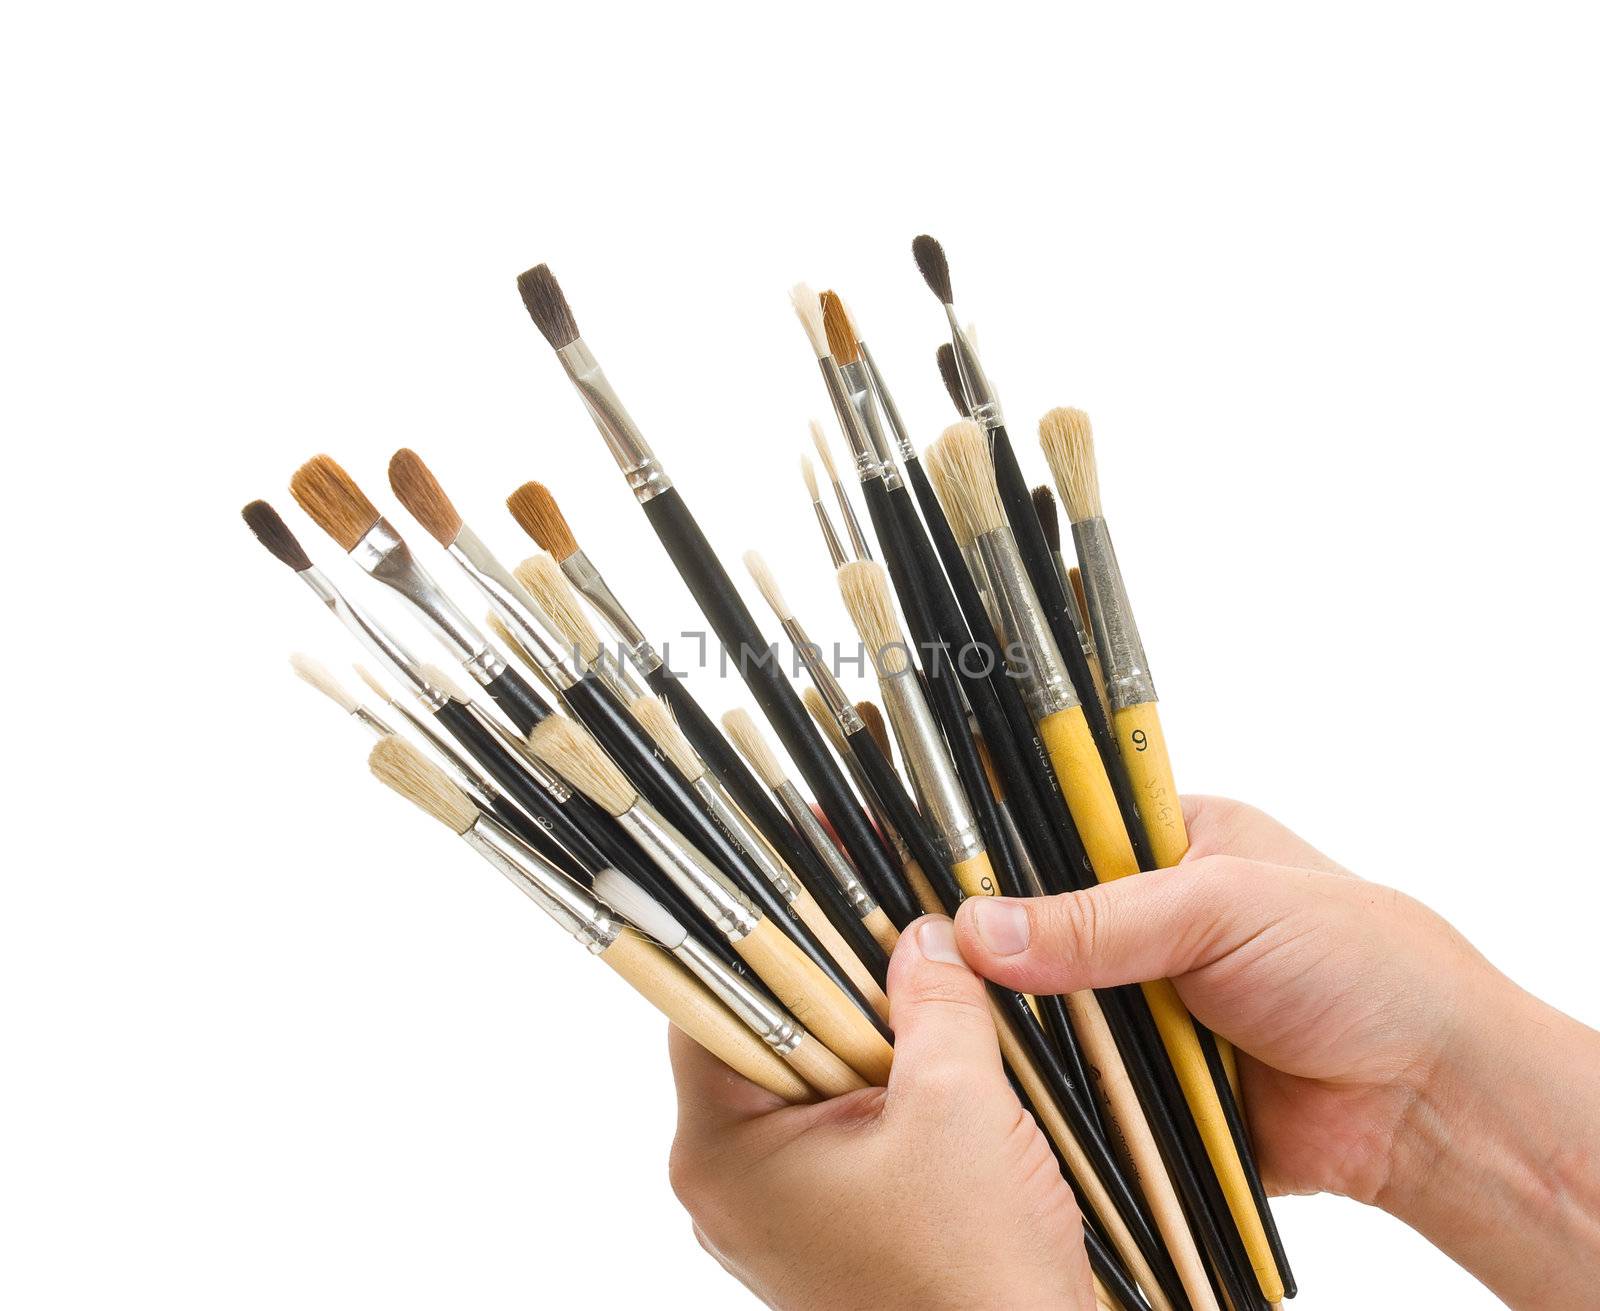 Brushes in hand isolated on white background